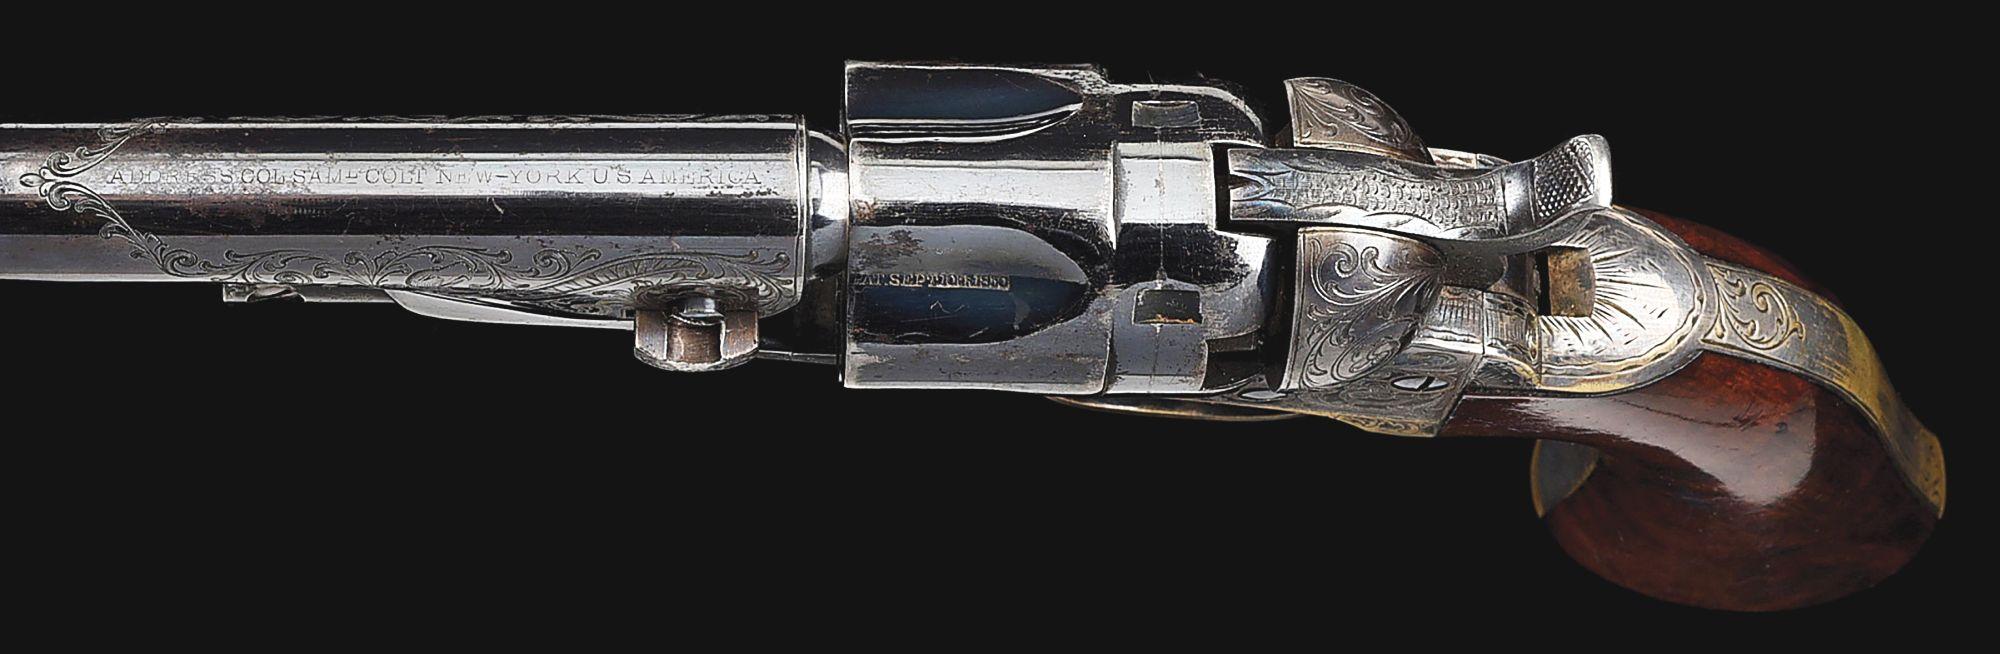 (A) OUTSTANDING, GUSTAVE YOUNG ENGRAVED, COLT 1862 POCKET POLICE PERCUSSION REVOLVER, EX. JOHN PARSO